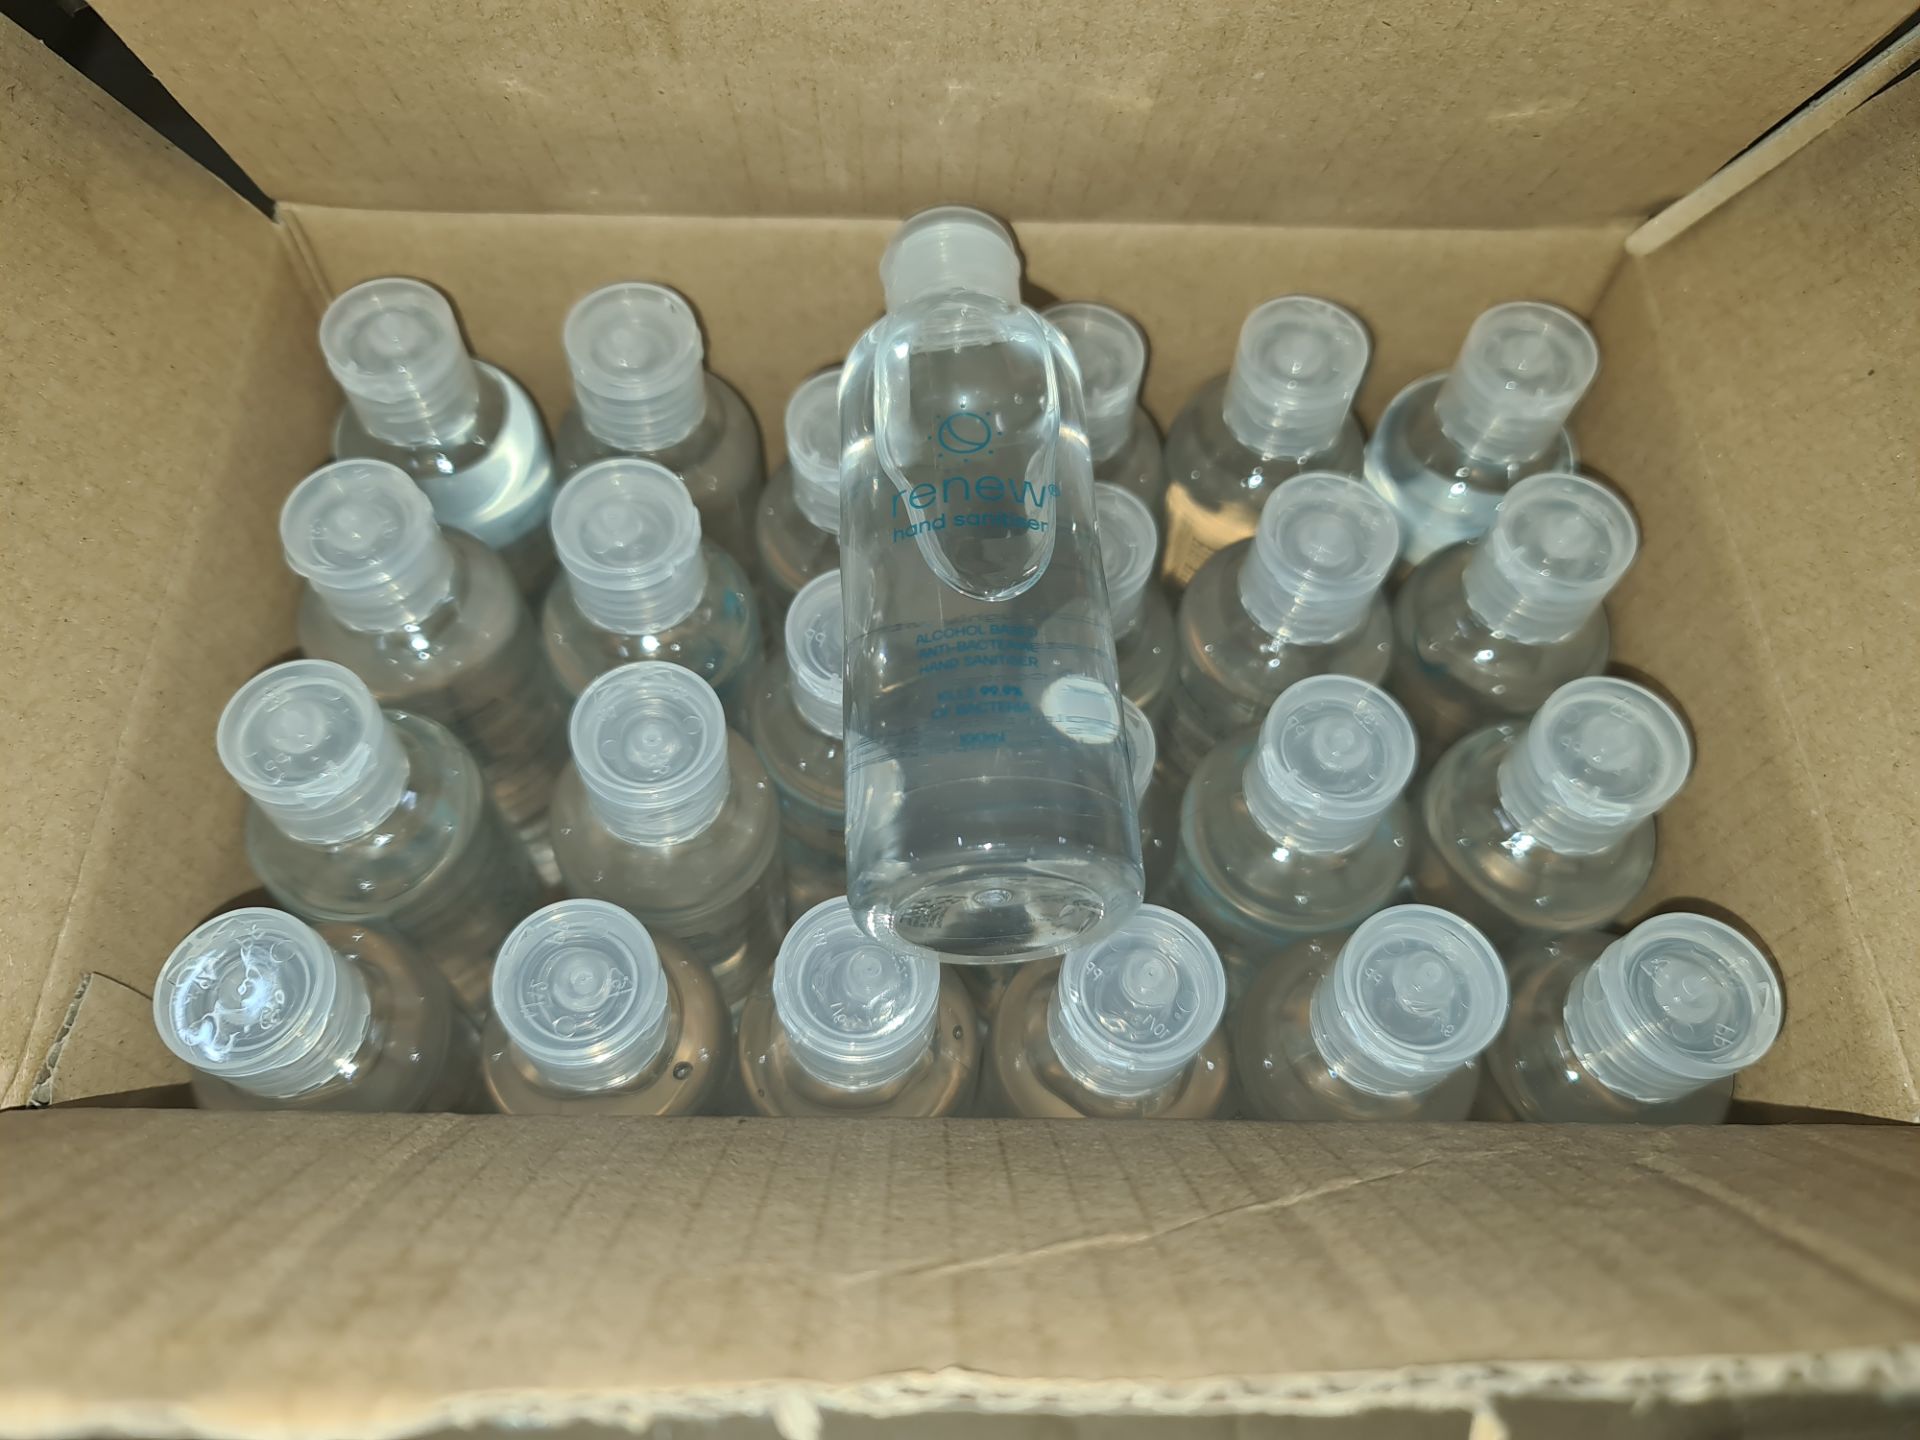 1 box containing a total of 144 travel size bottles of alcohol based hand sanitiser. Each bottle is